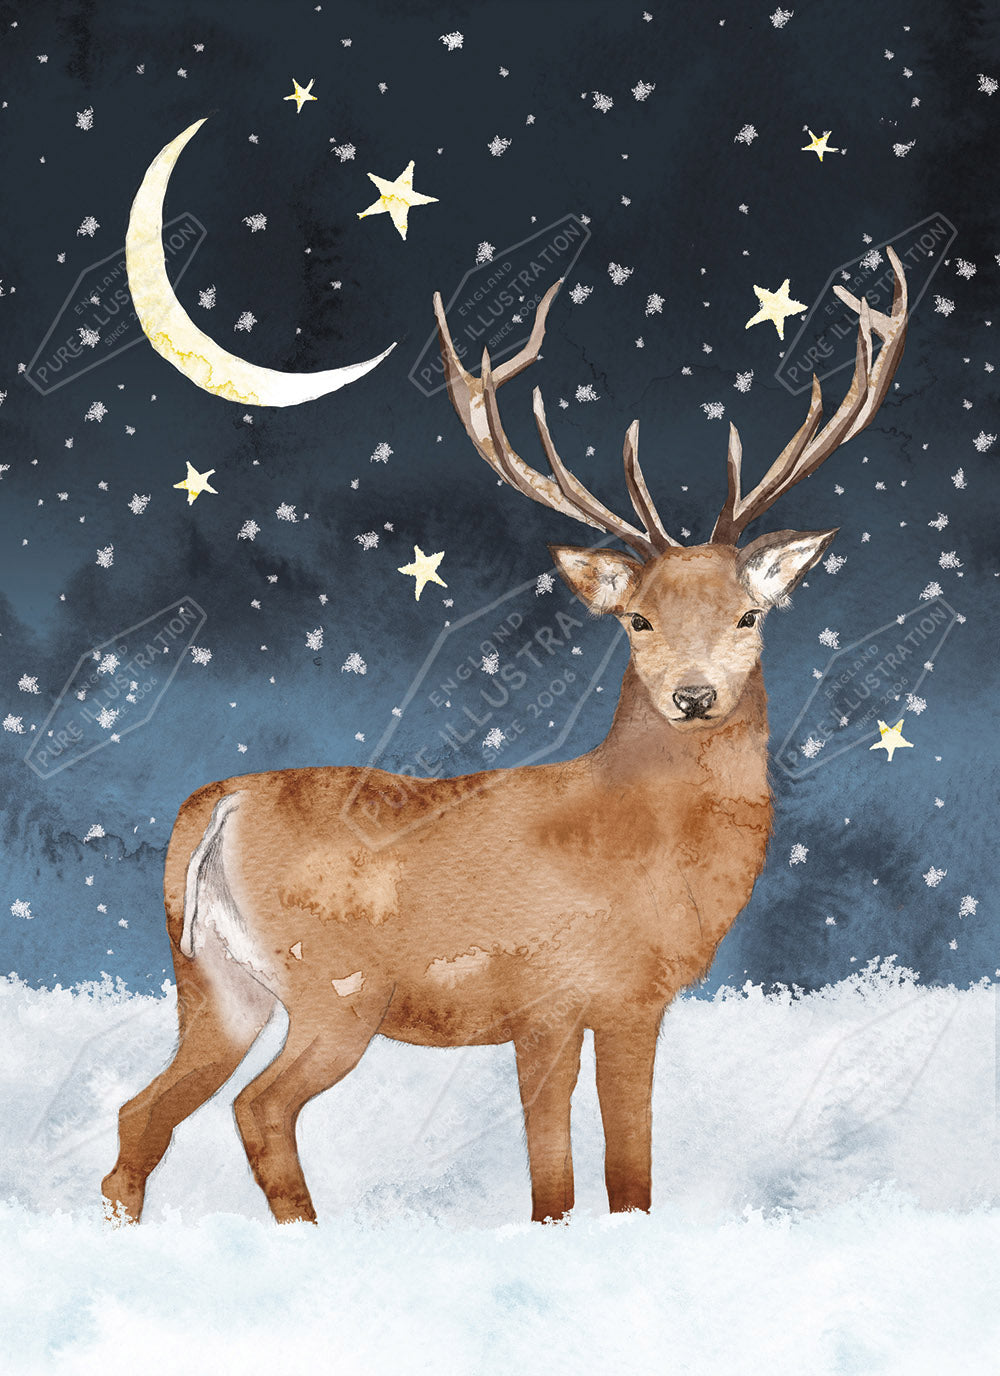 Christmas Stag Design by Victoria Marks for Pure Art Licensing Agency & Surface Design Studio